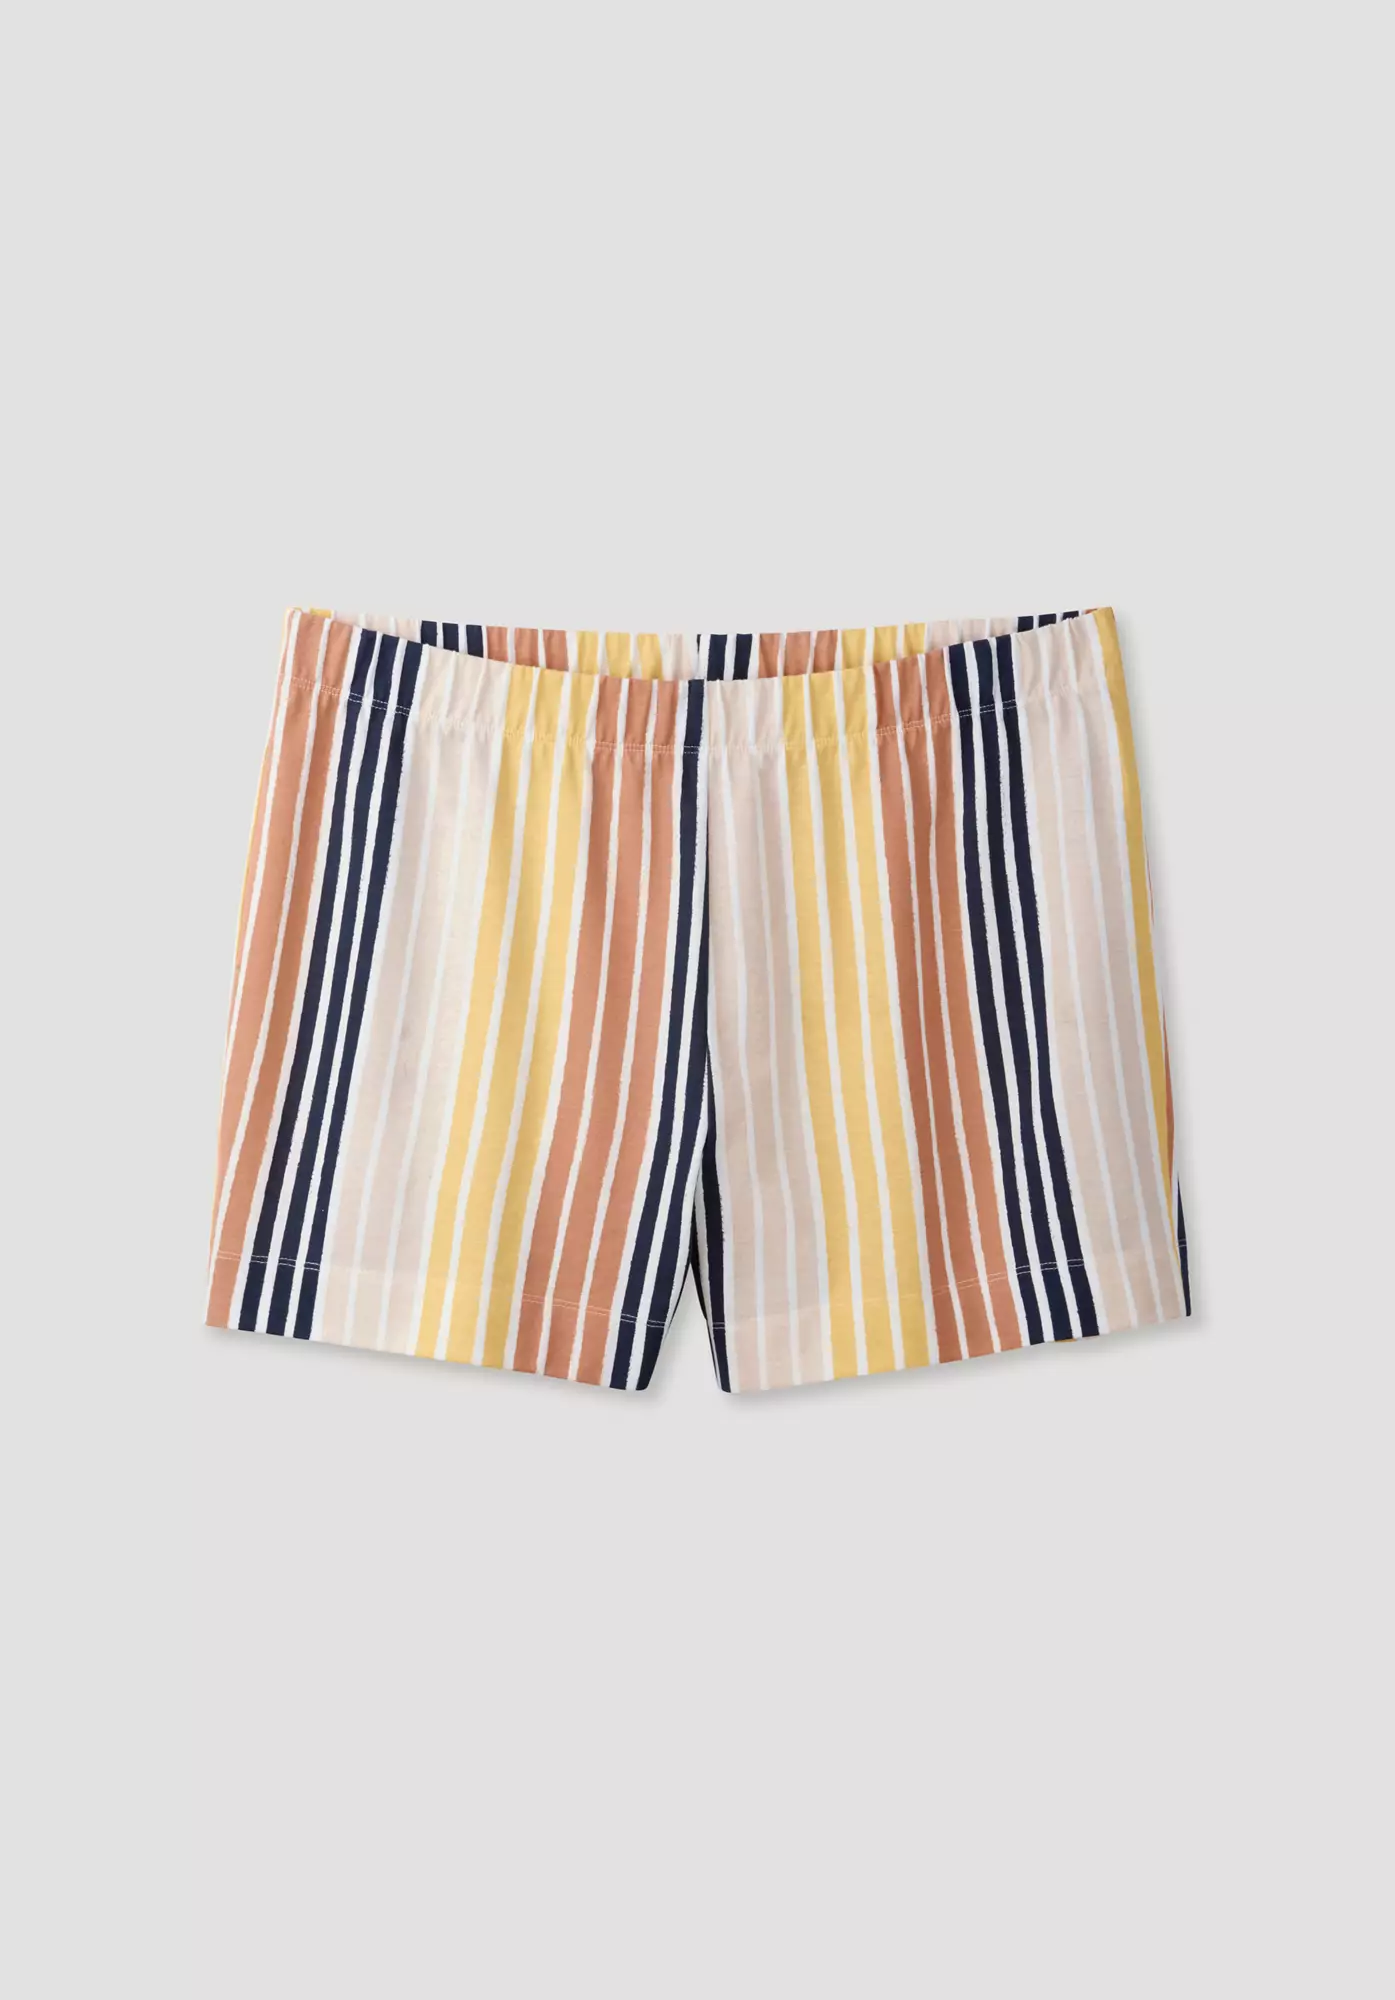 Sleep shorts made from pure organic cotton - 2